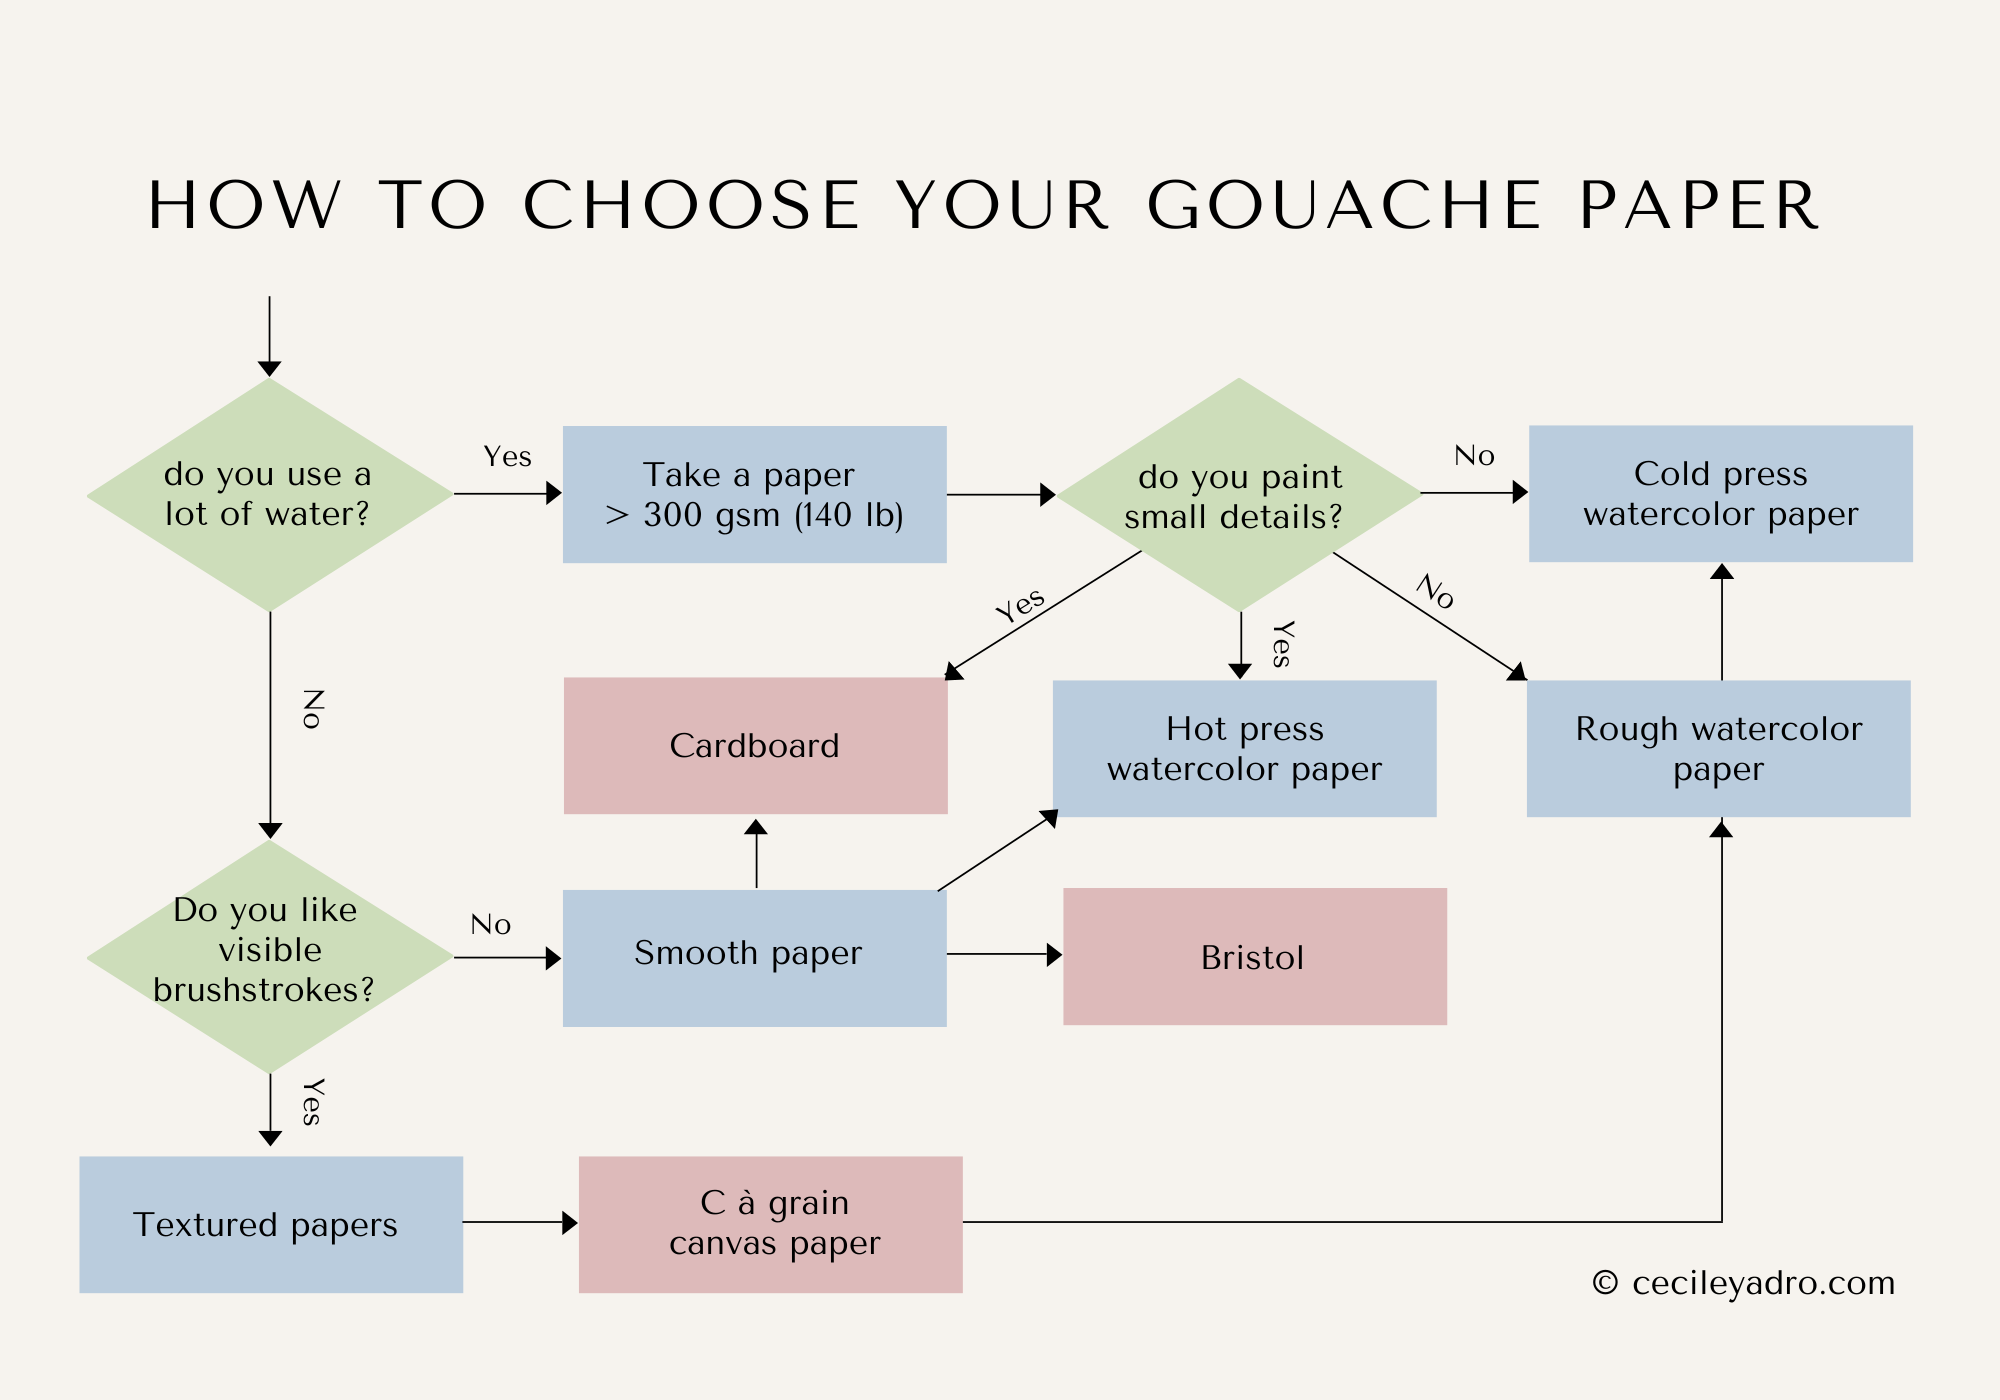 How to choose your gouache paper